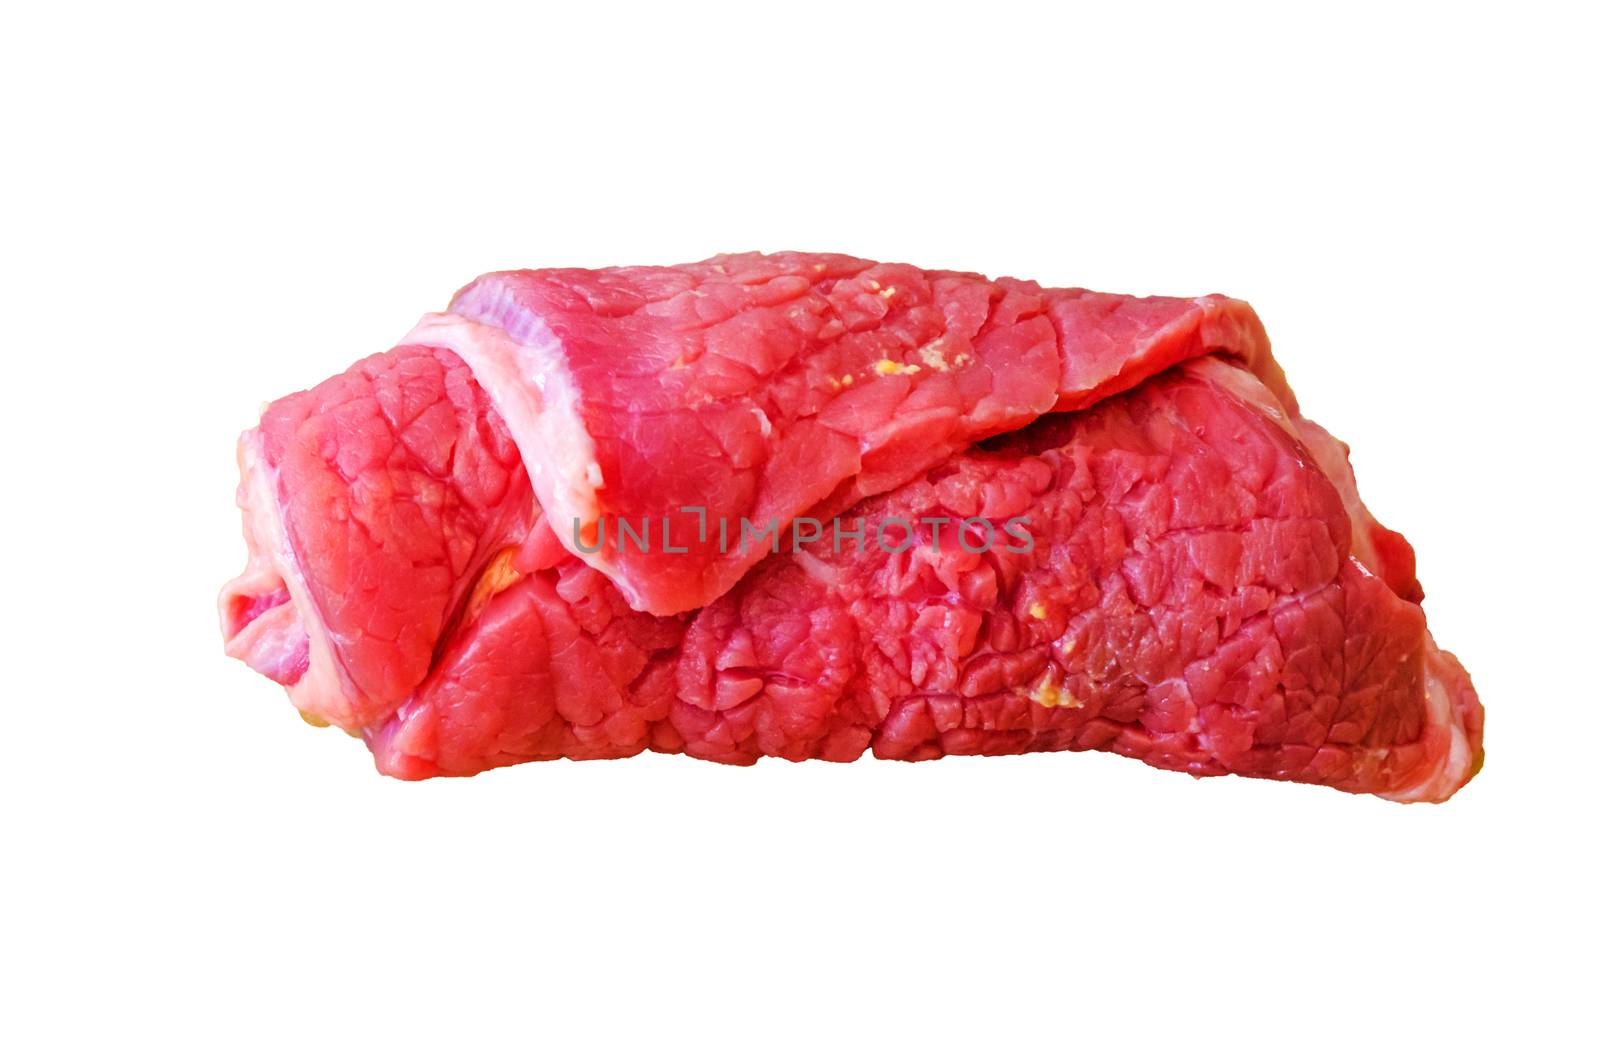 Non-fried roulade of fresh beef in front of white background
